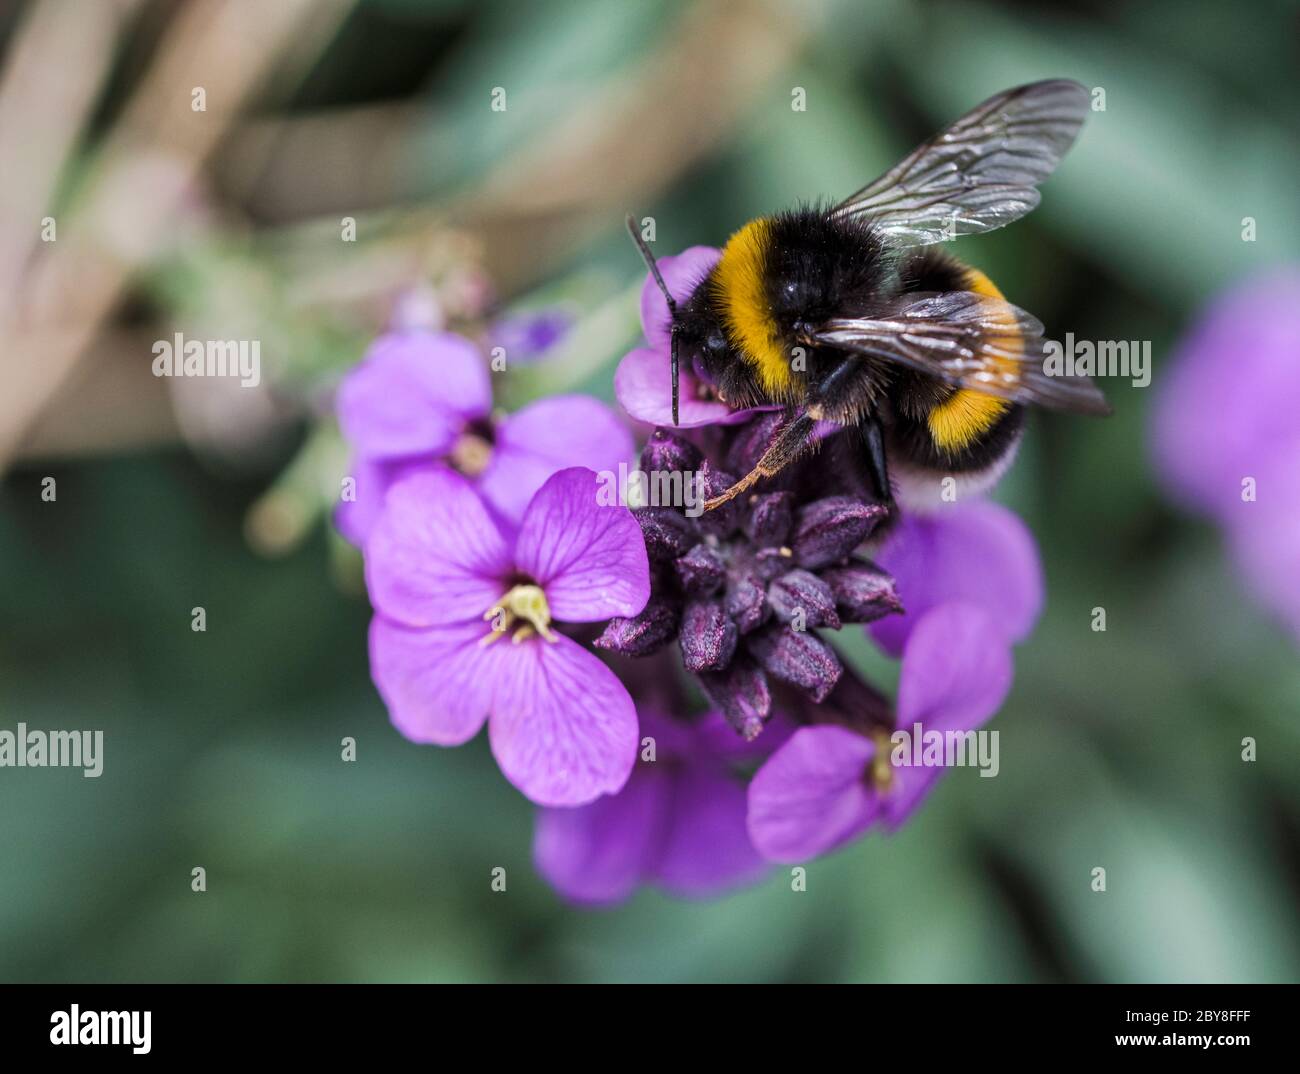 Close-up from a bumblebee collecting honey from a purple blooming erysimum wallflower on a blurry green background Stock Photo